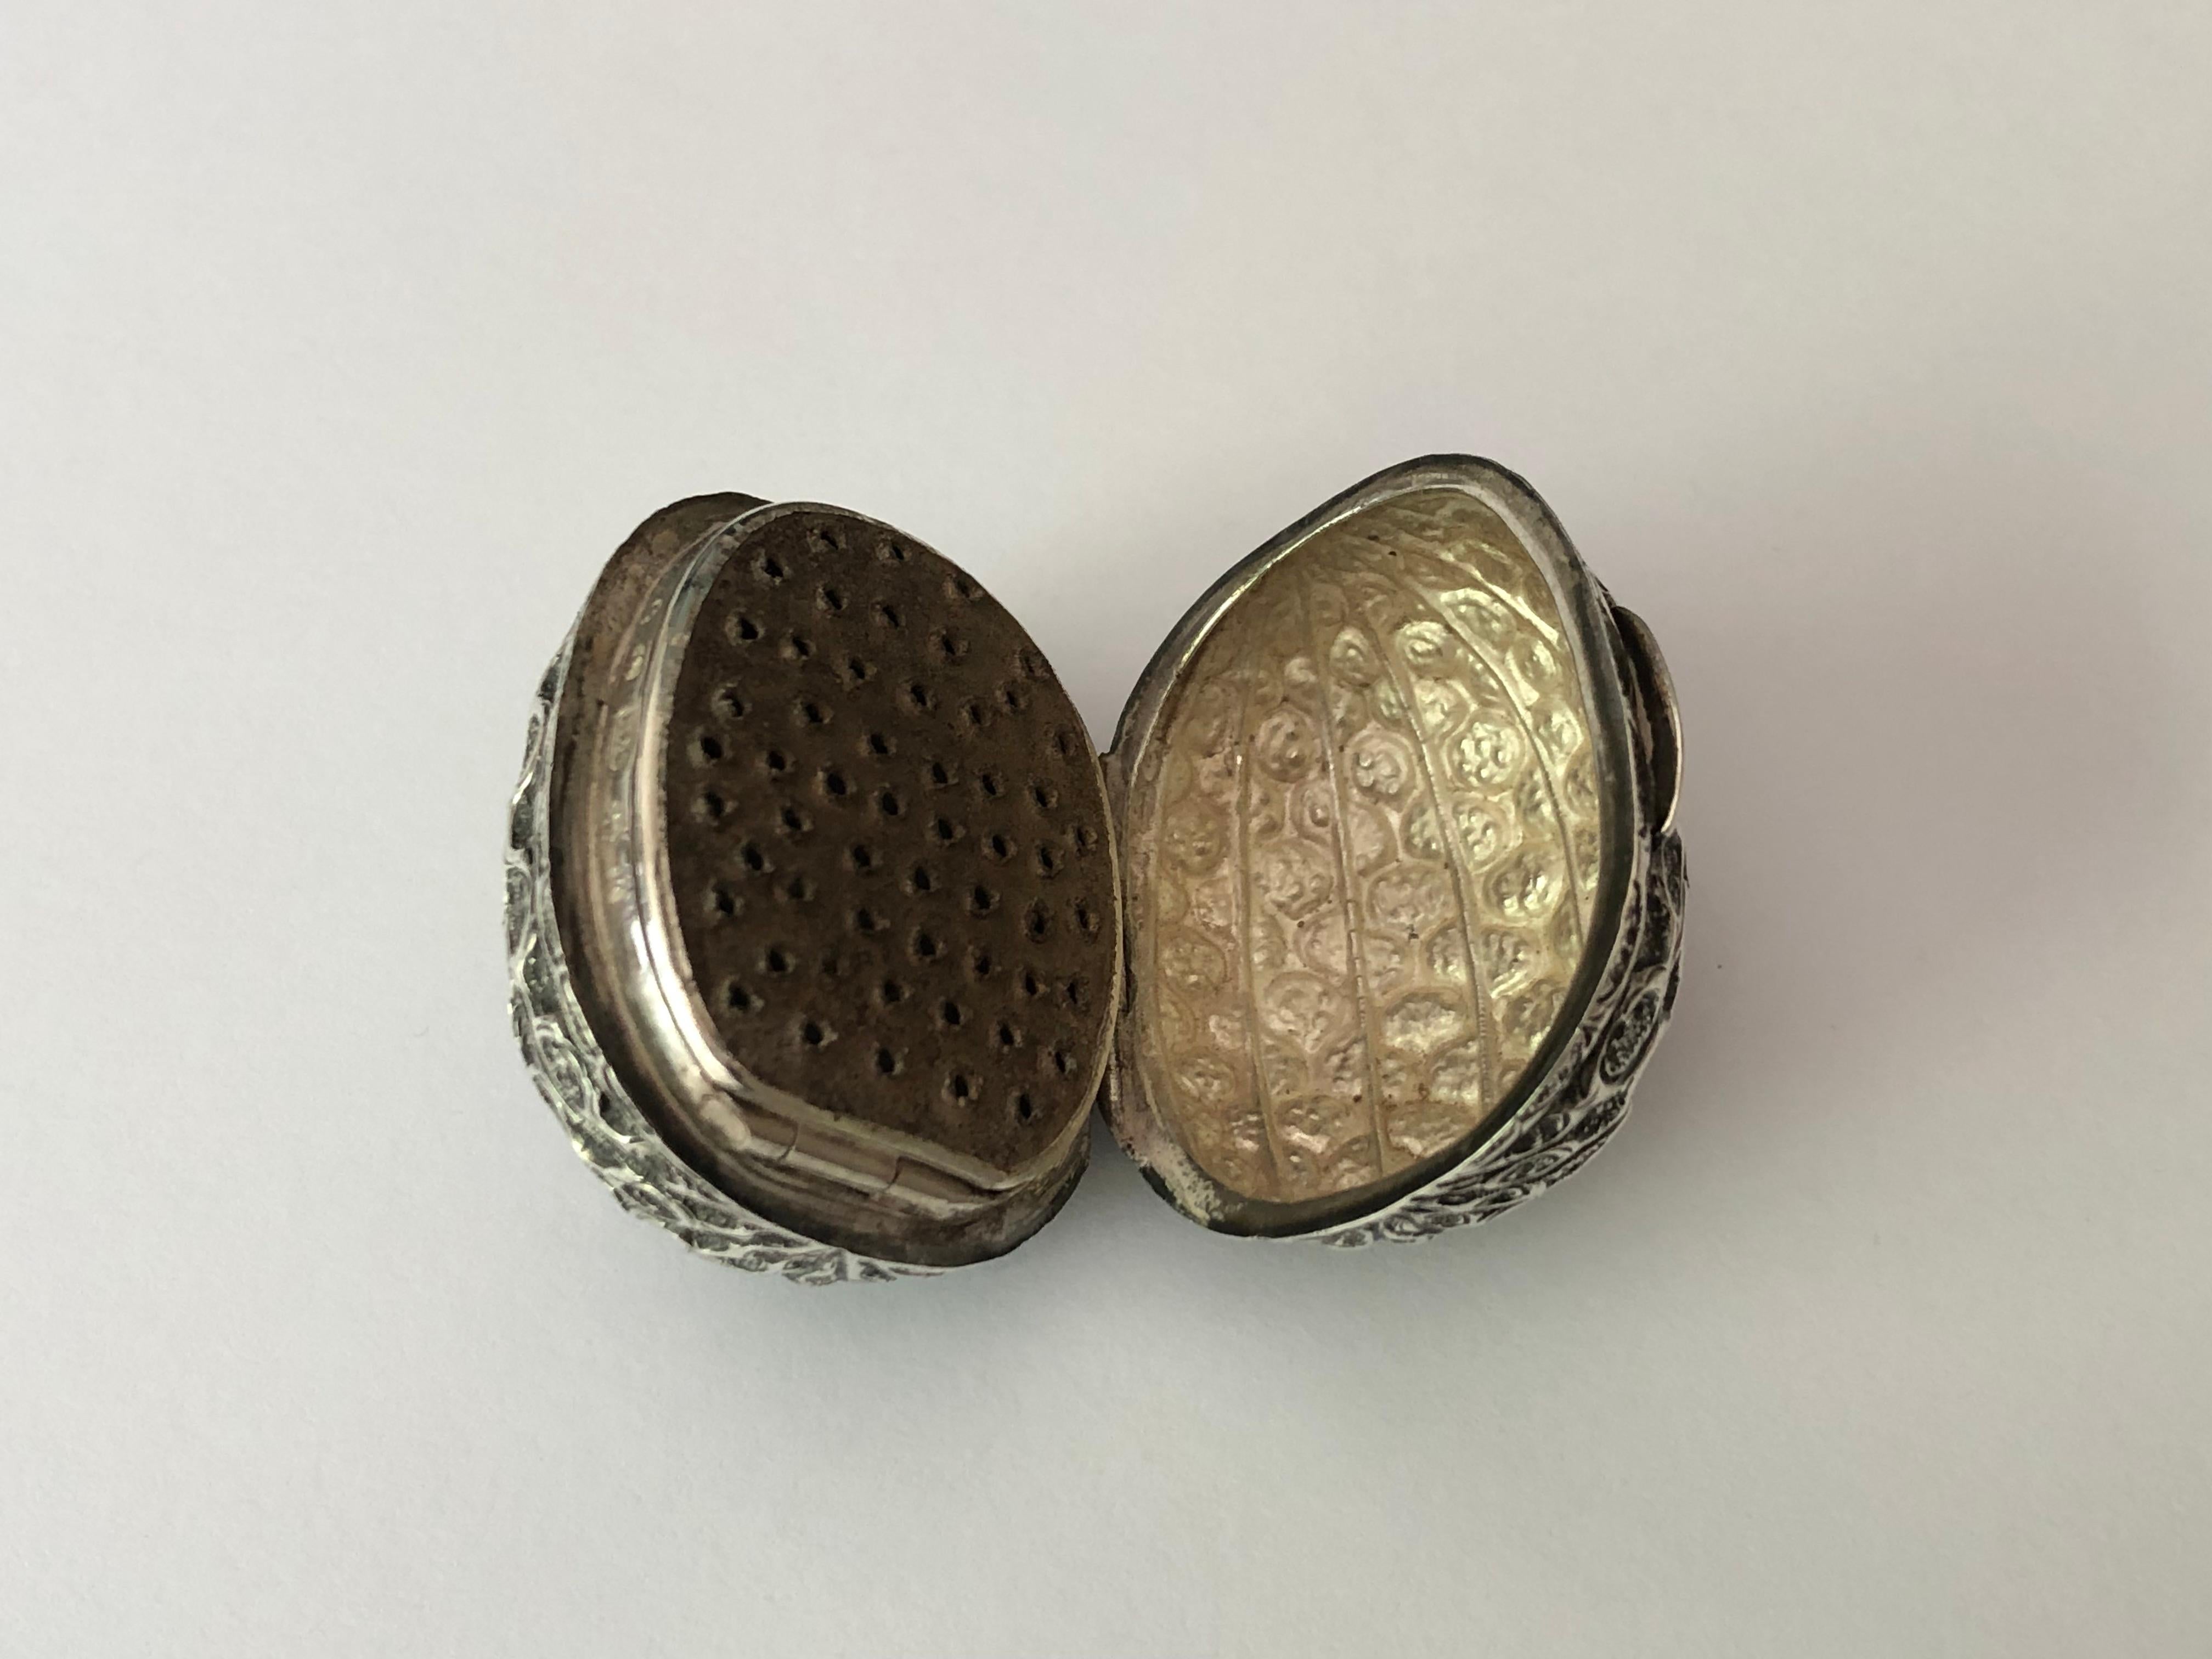 A rare Victorian silver naturalistic nutmeg grater, modelled in the form of a nutmeg/mace.
Hilliard and Thomason. Birmingham, 1859.

The hinged cover opens to reveal a blue steel rasp. The rasp in turn is hinged to reveal a compartment in which